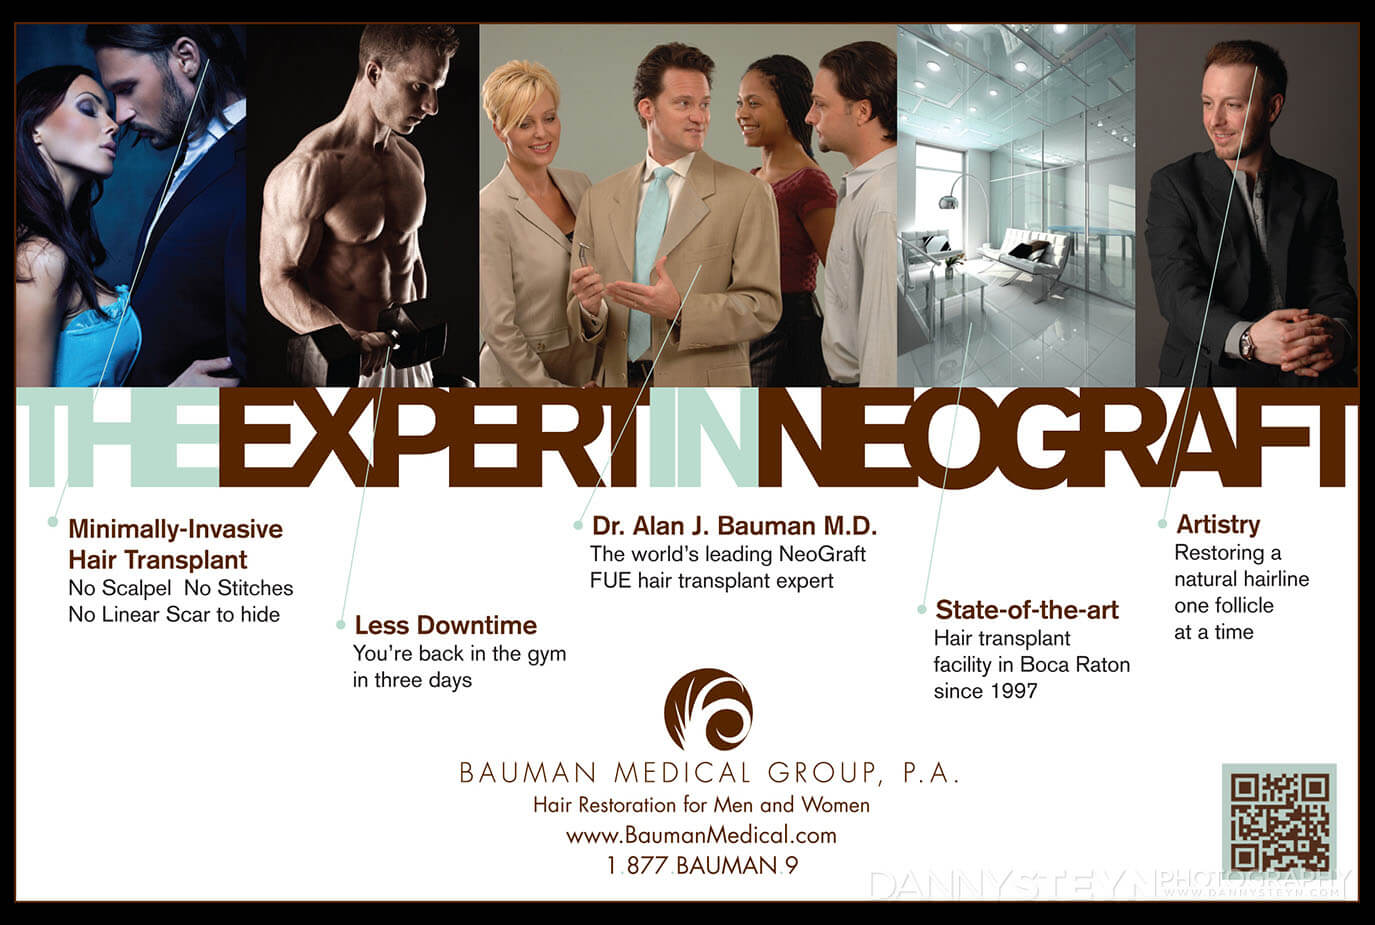 commercial photography tearsheets miami